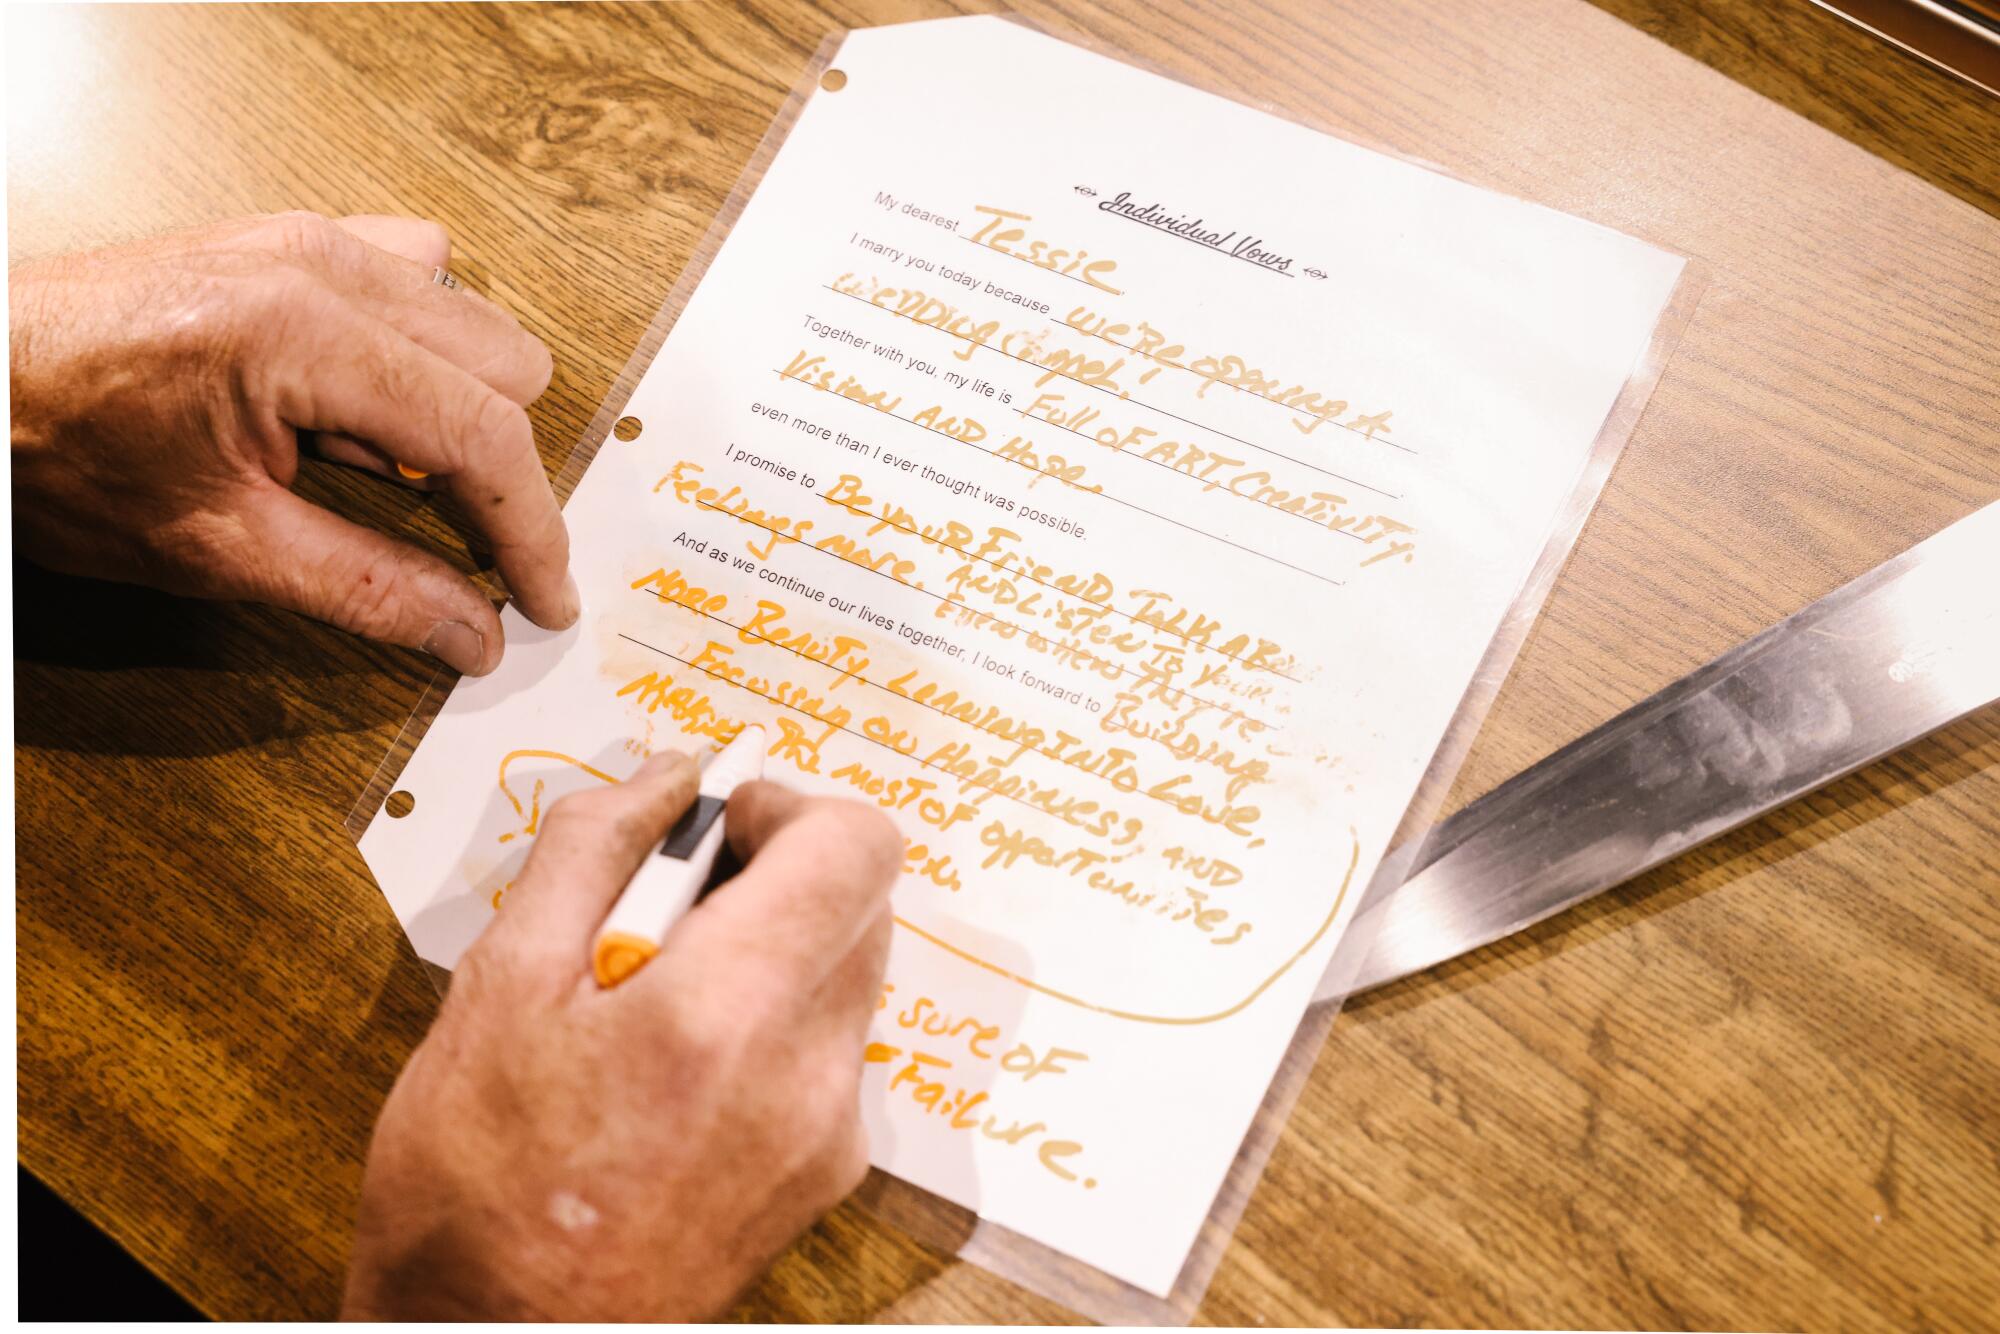 Dan Gambelin writes his wedding vows on a form.